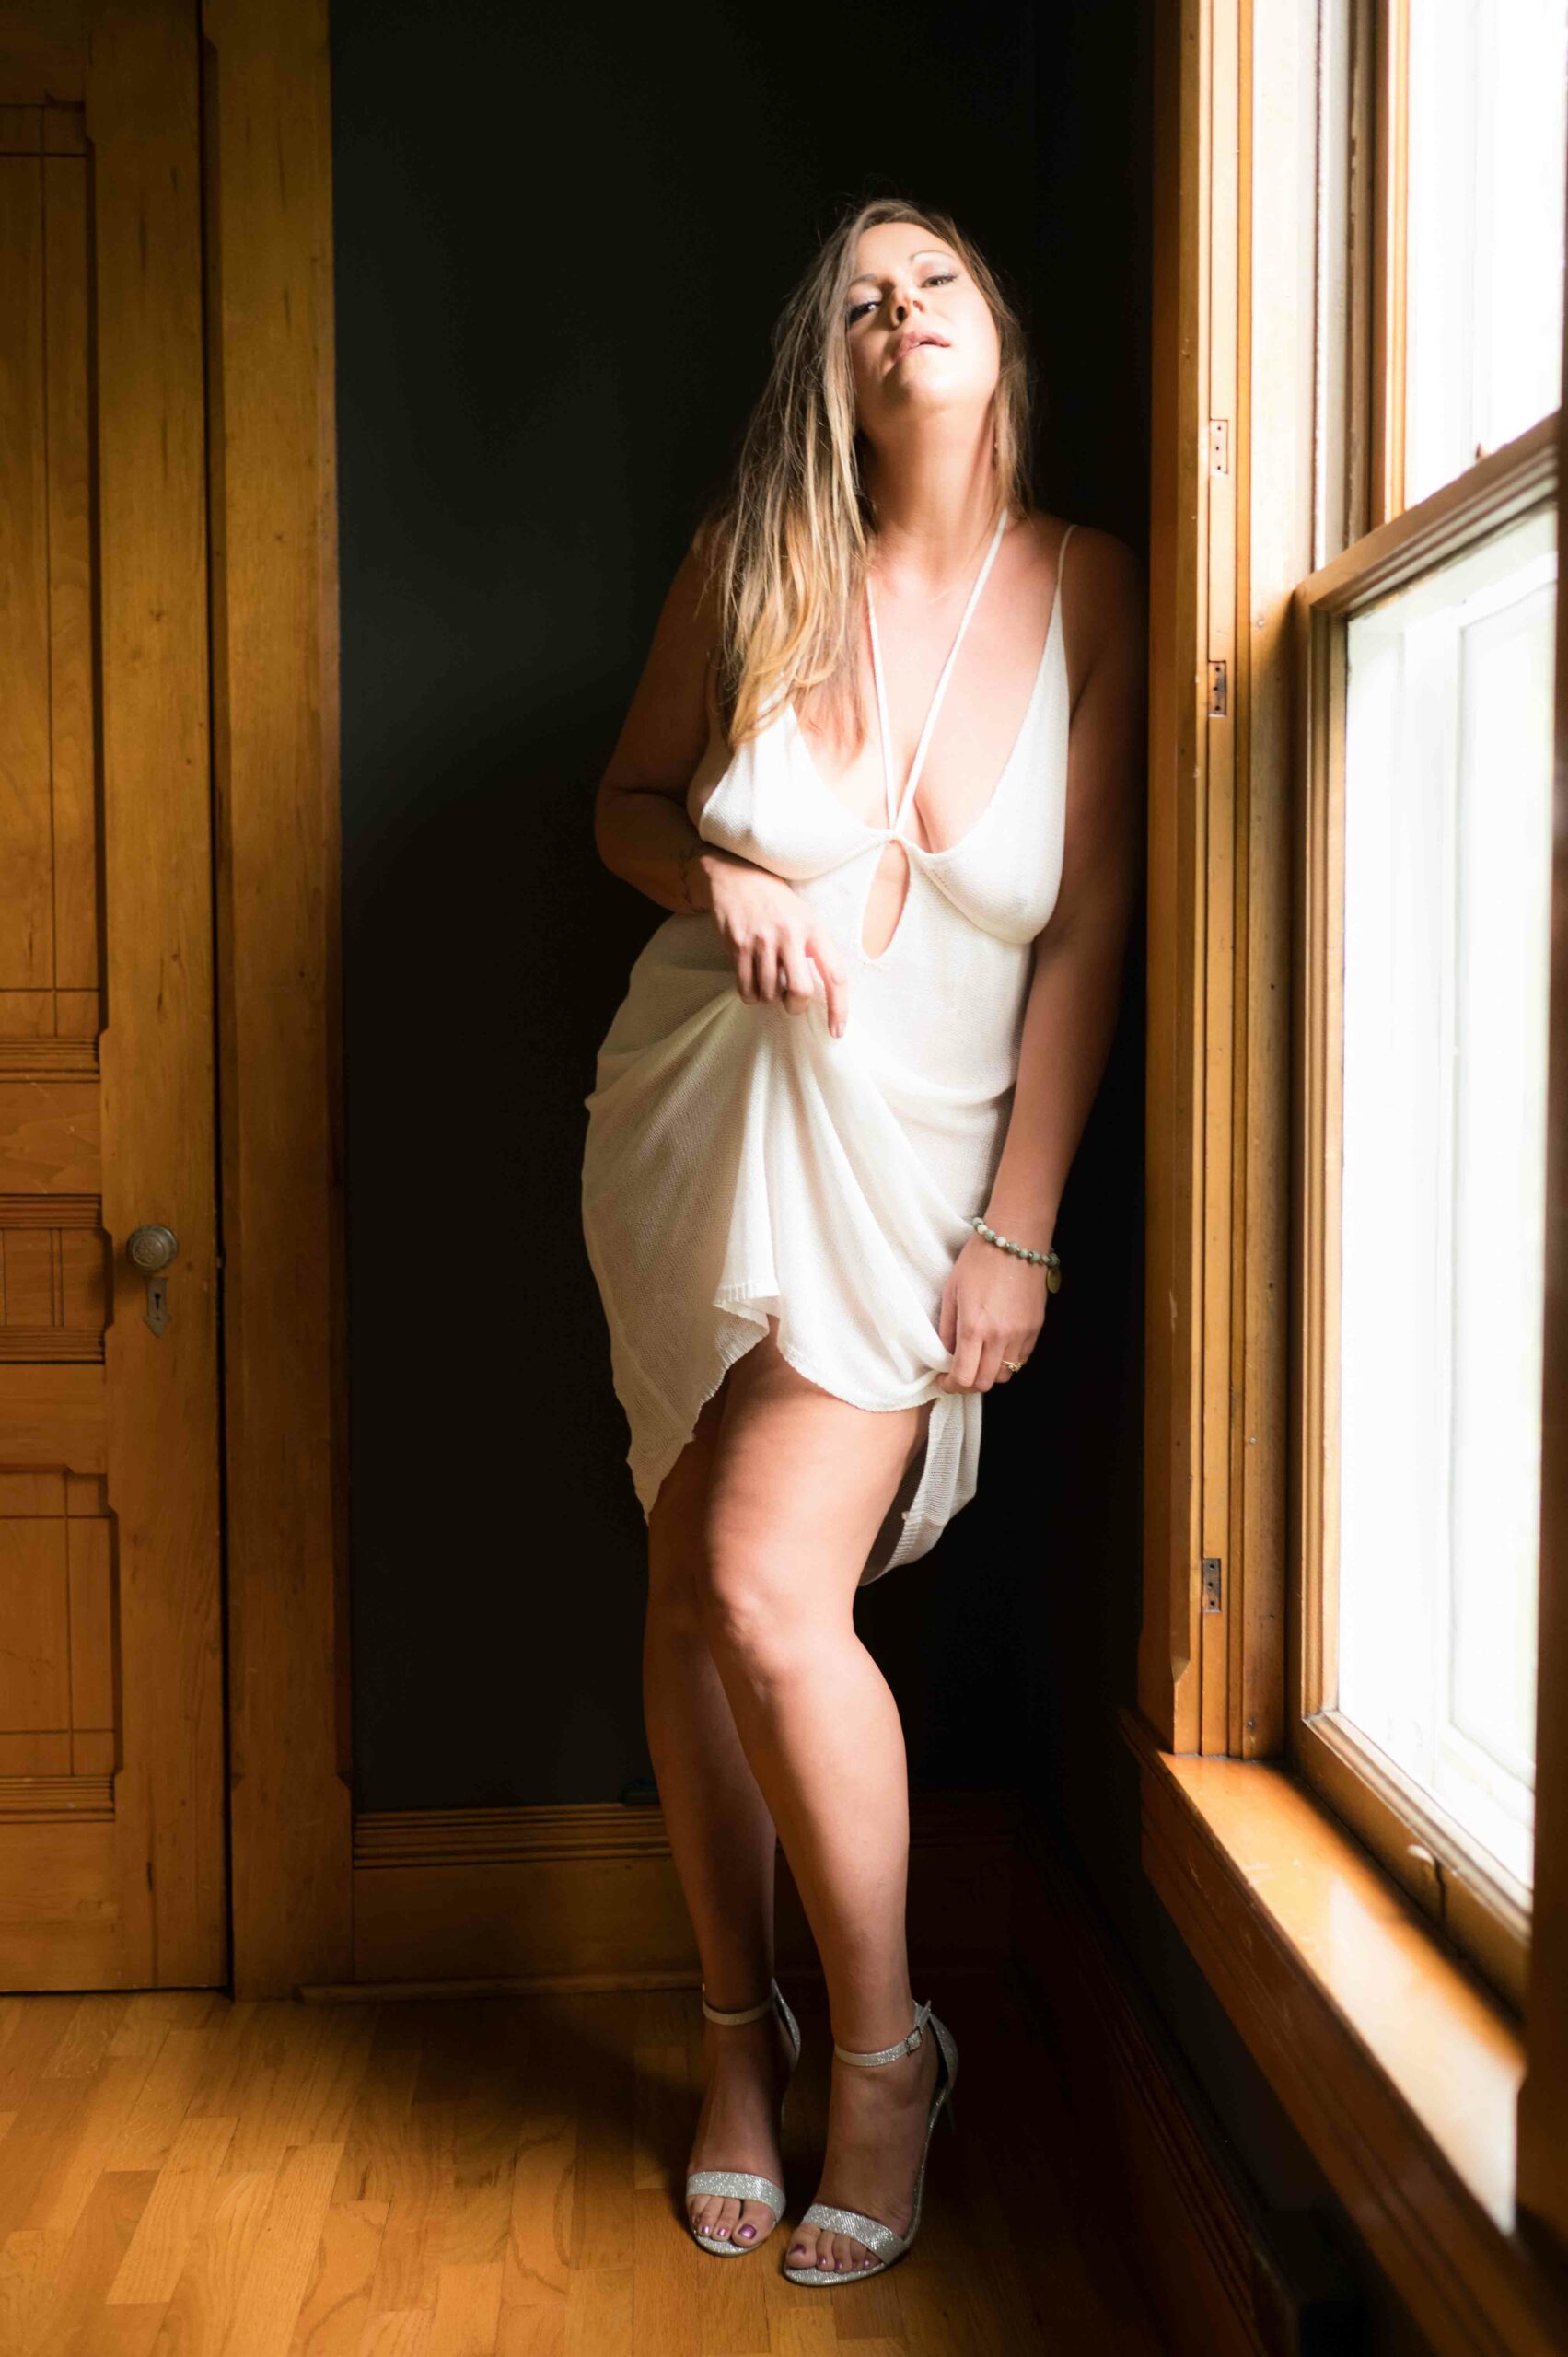 Photo of a woman standing beside a window, wearing white lingerie